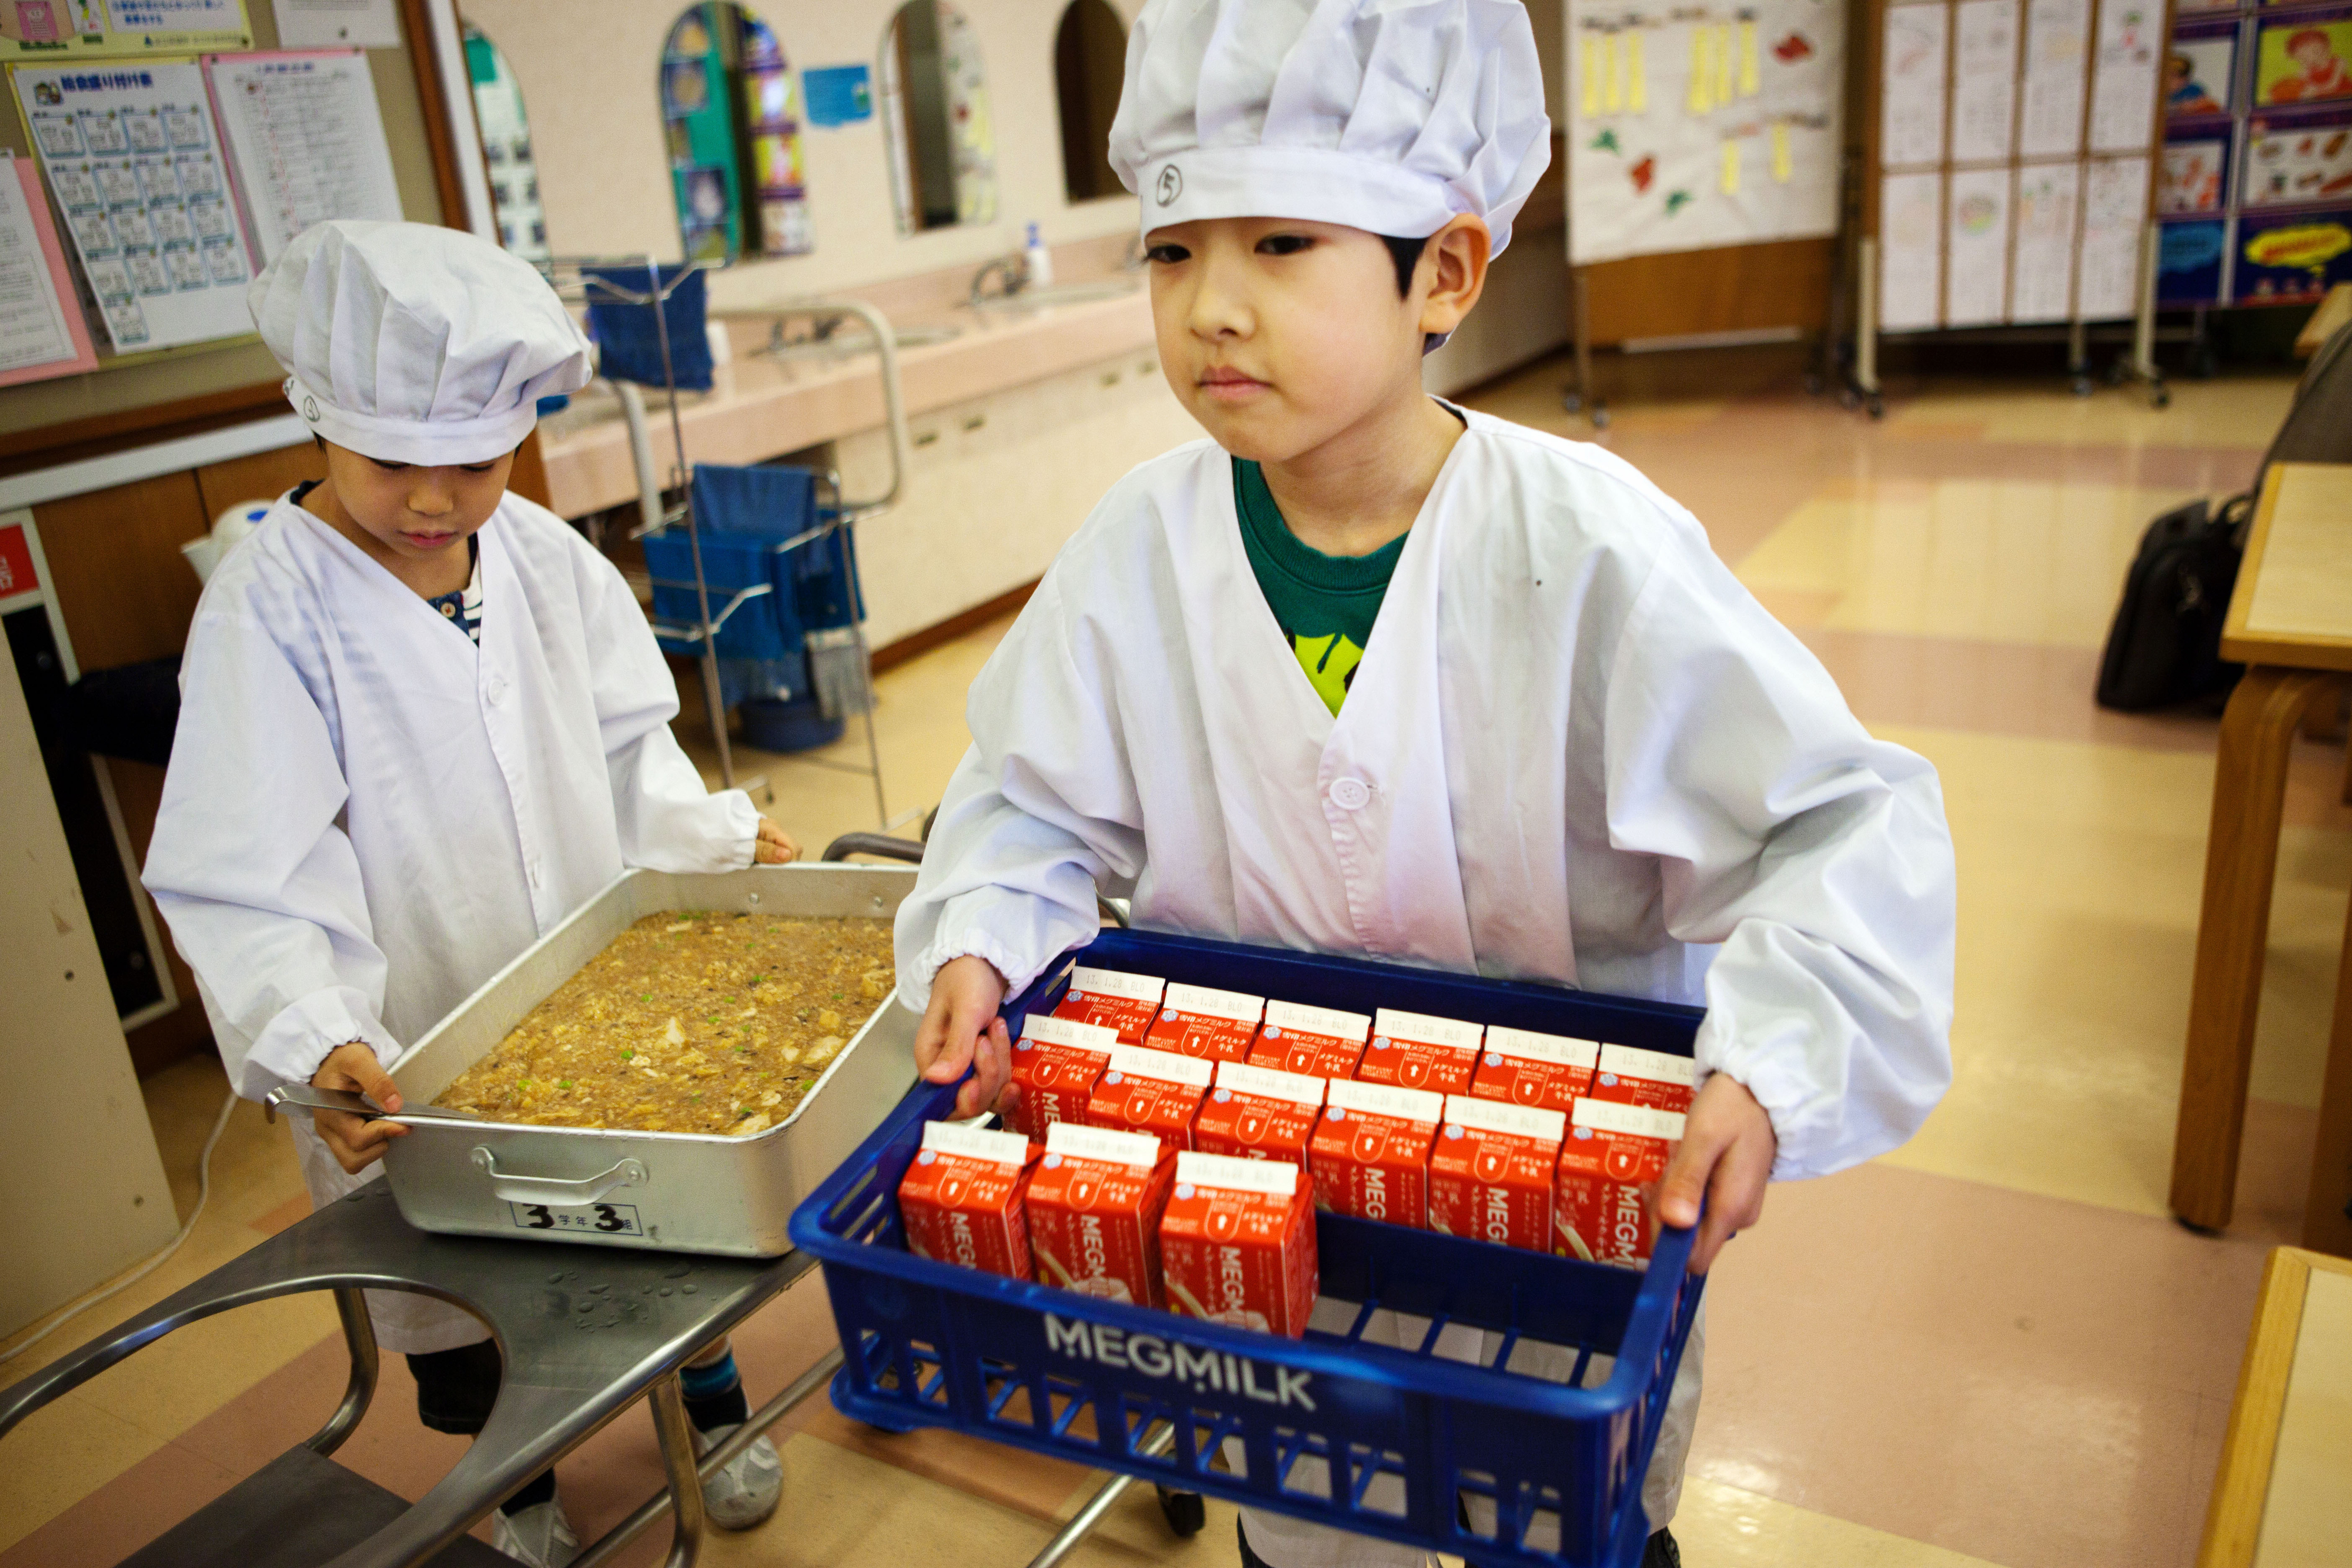 Two children in chef hats and aprons are serving milk cartons at a school